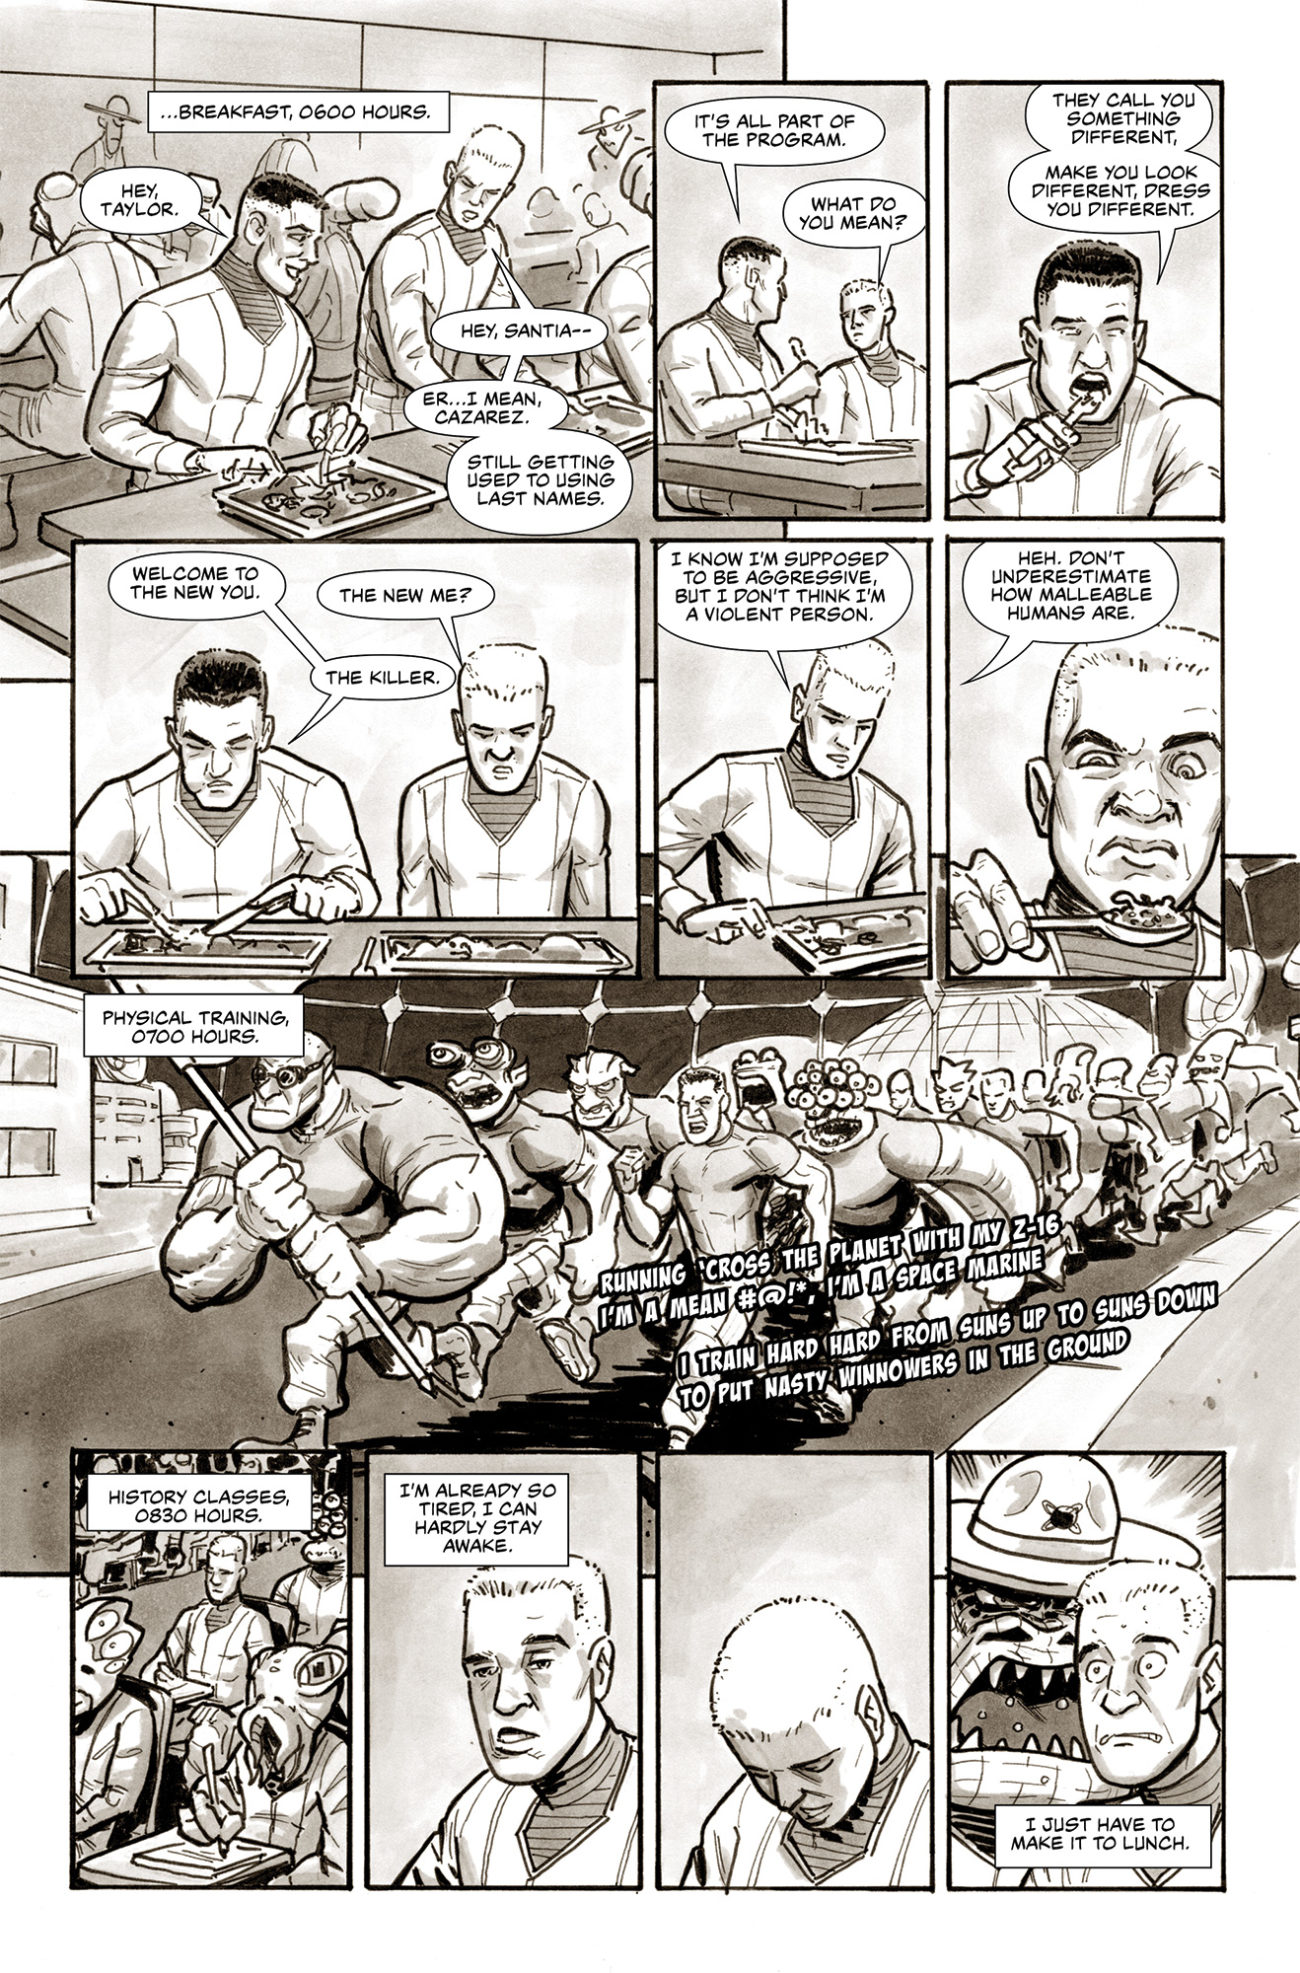 Space Corps #2 - Page 3